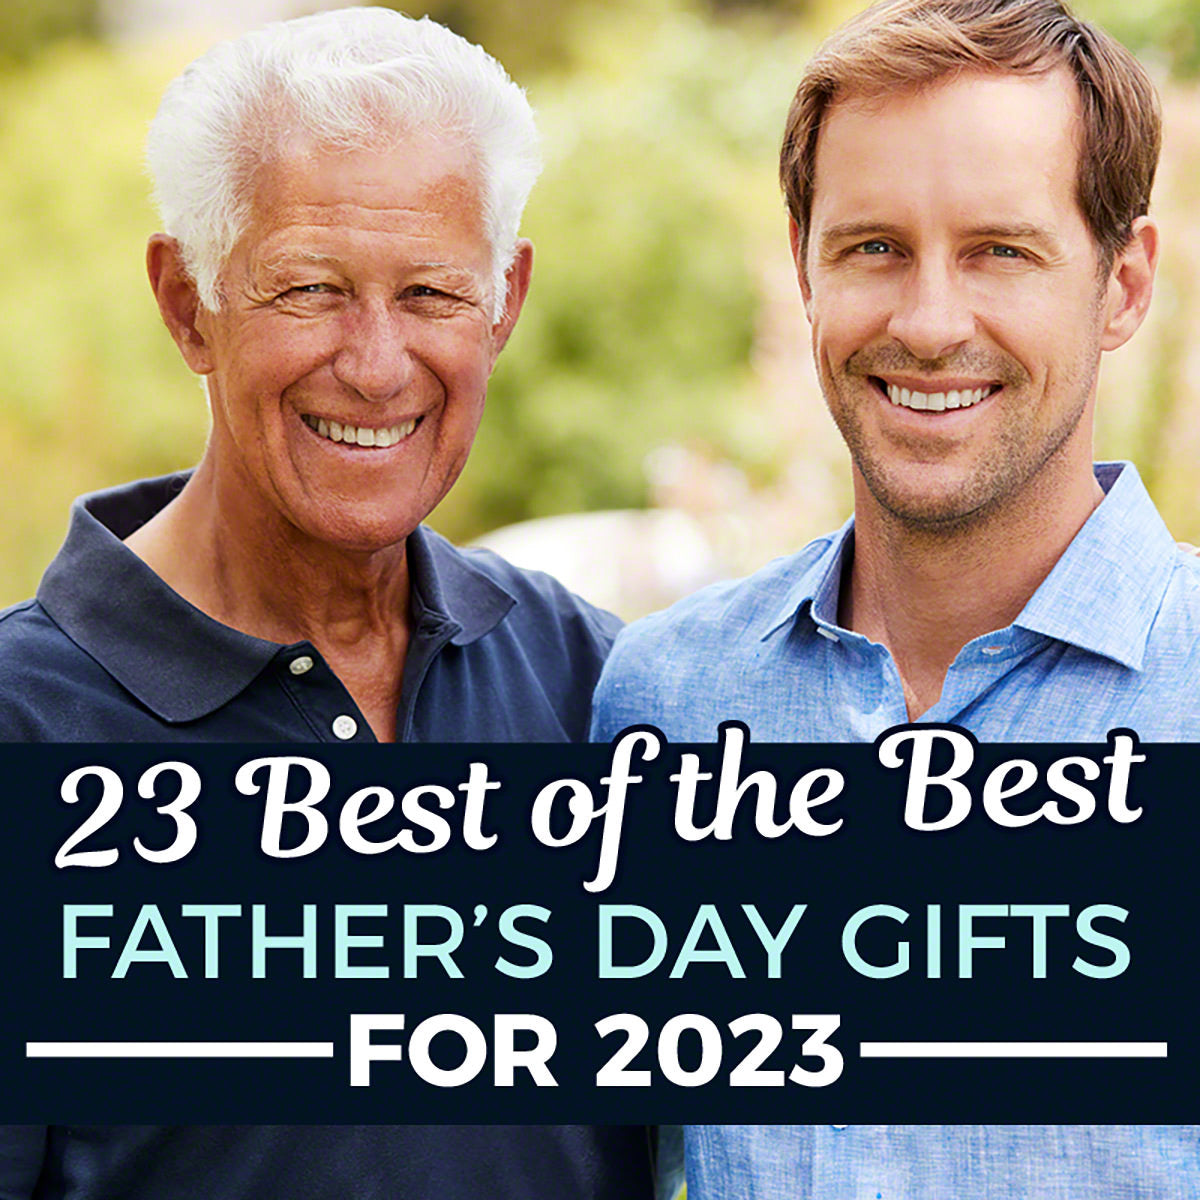 Best Father's Day Gift Ideas for Healthy Skin | Father's Day 2023